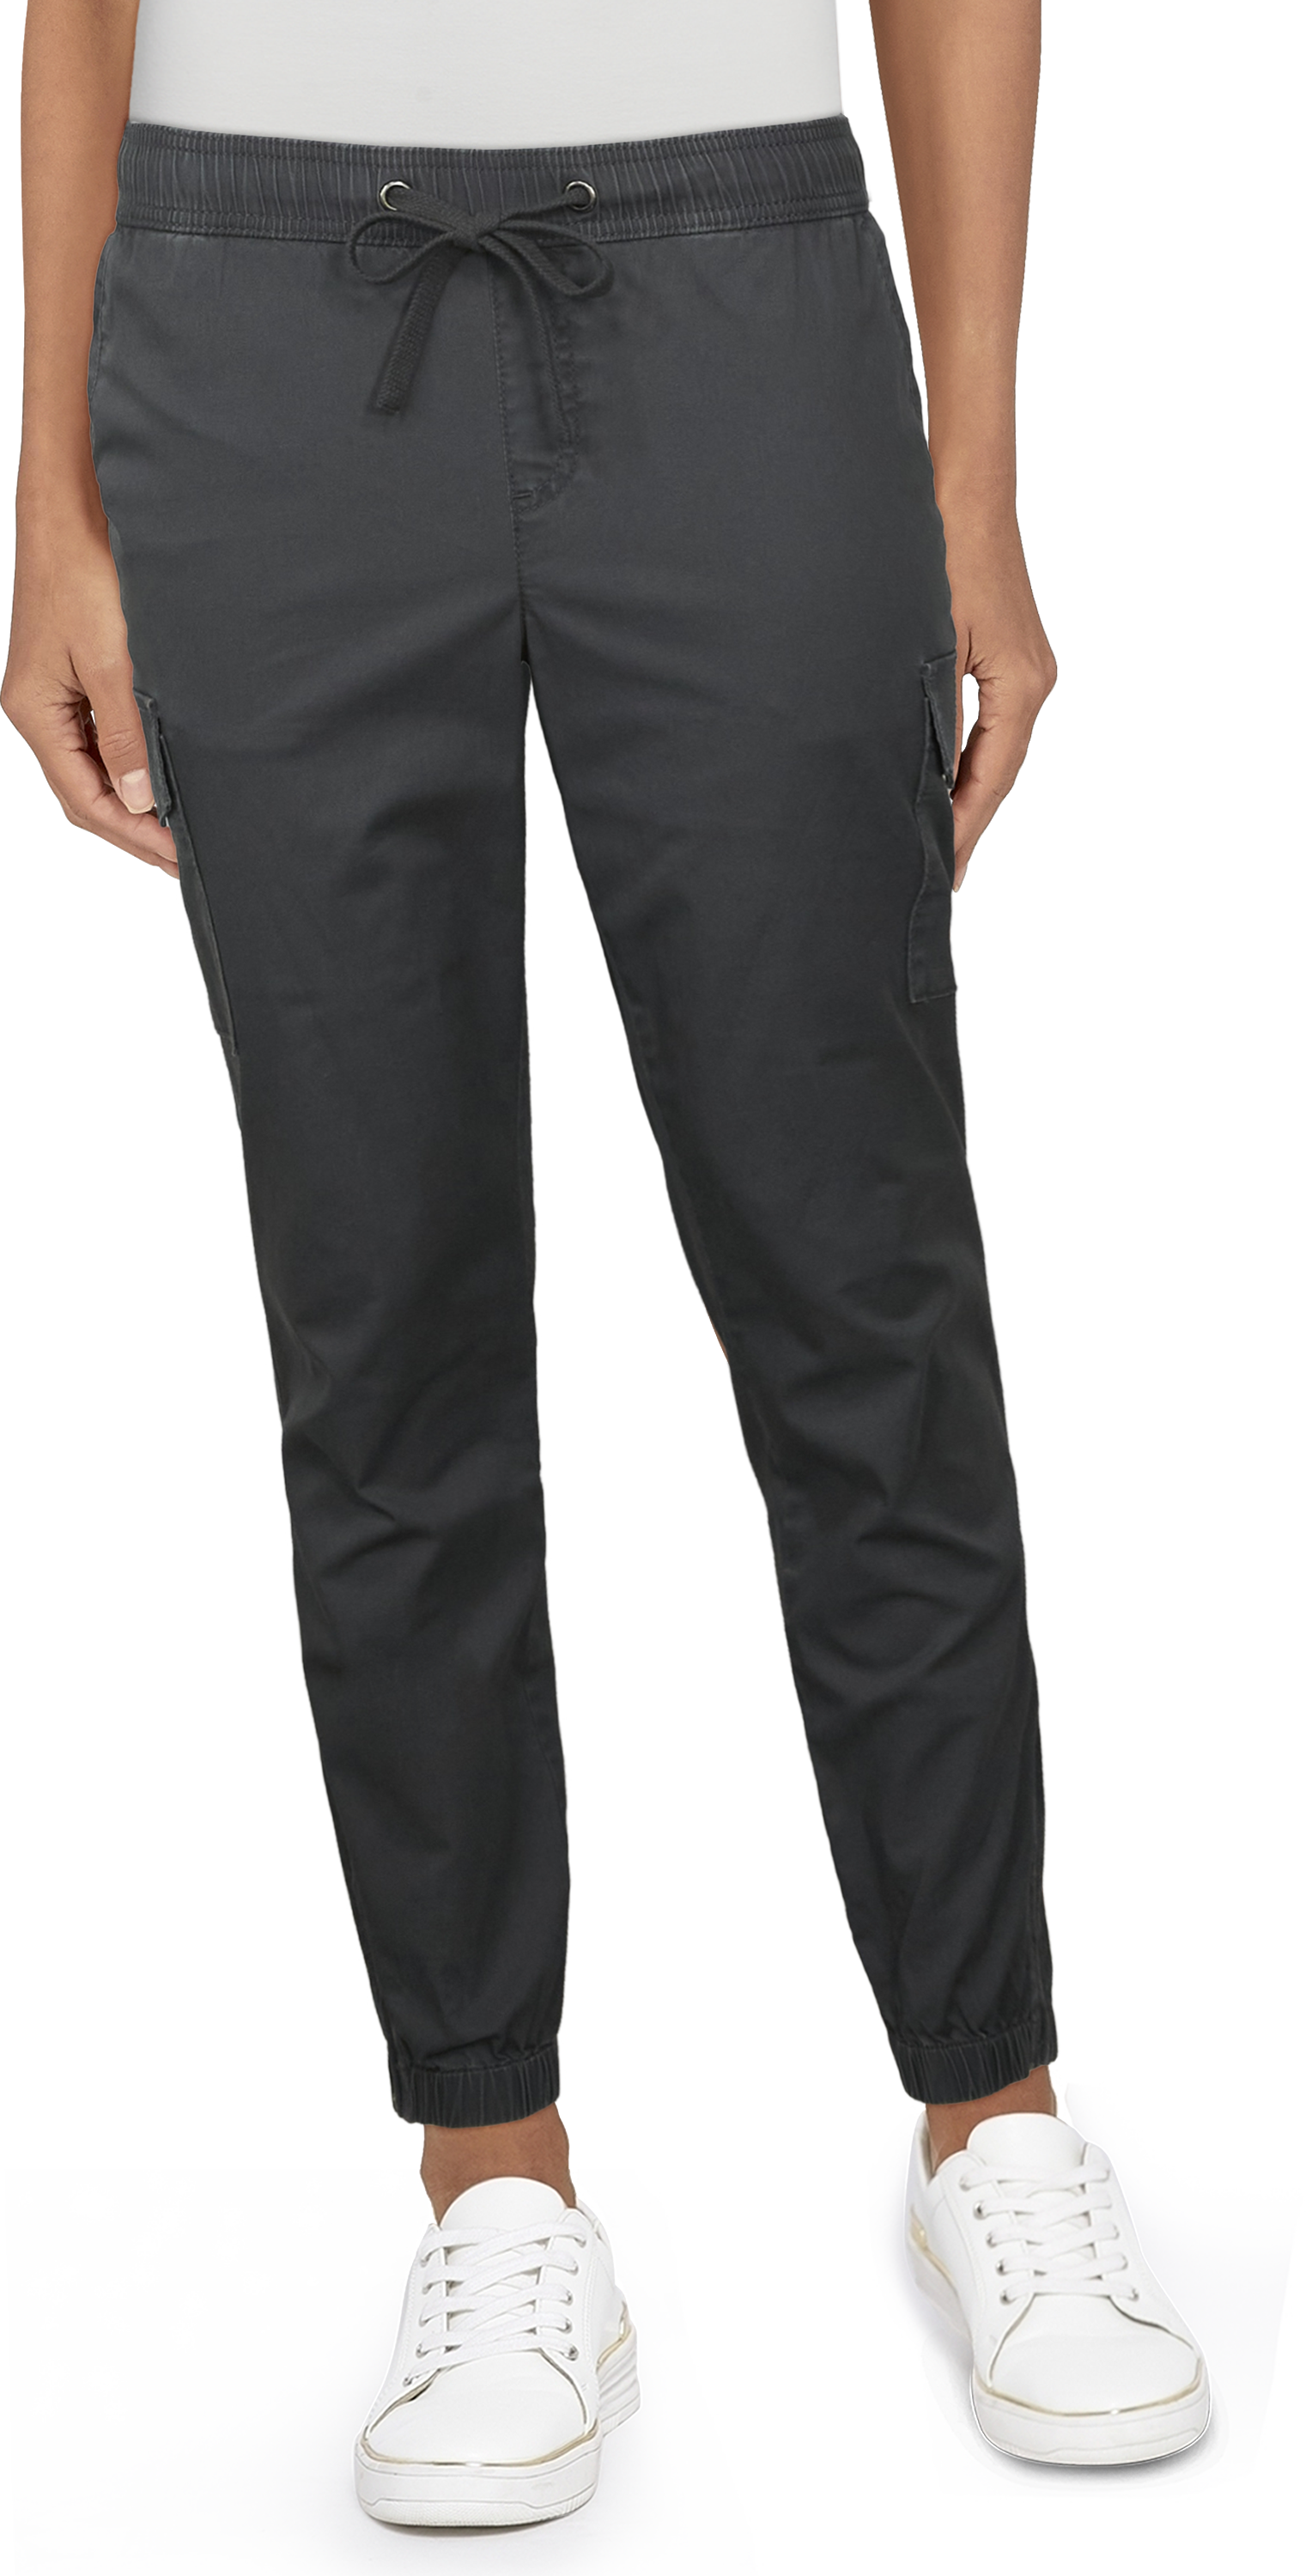 Natural Reflections Bella Vista Joggers for Ladies - New Graphite Gray - XS